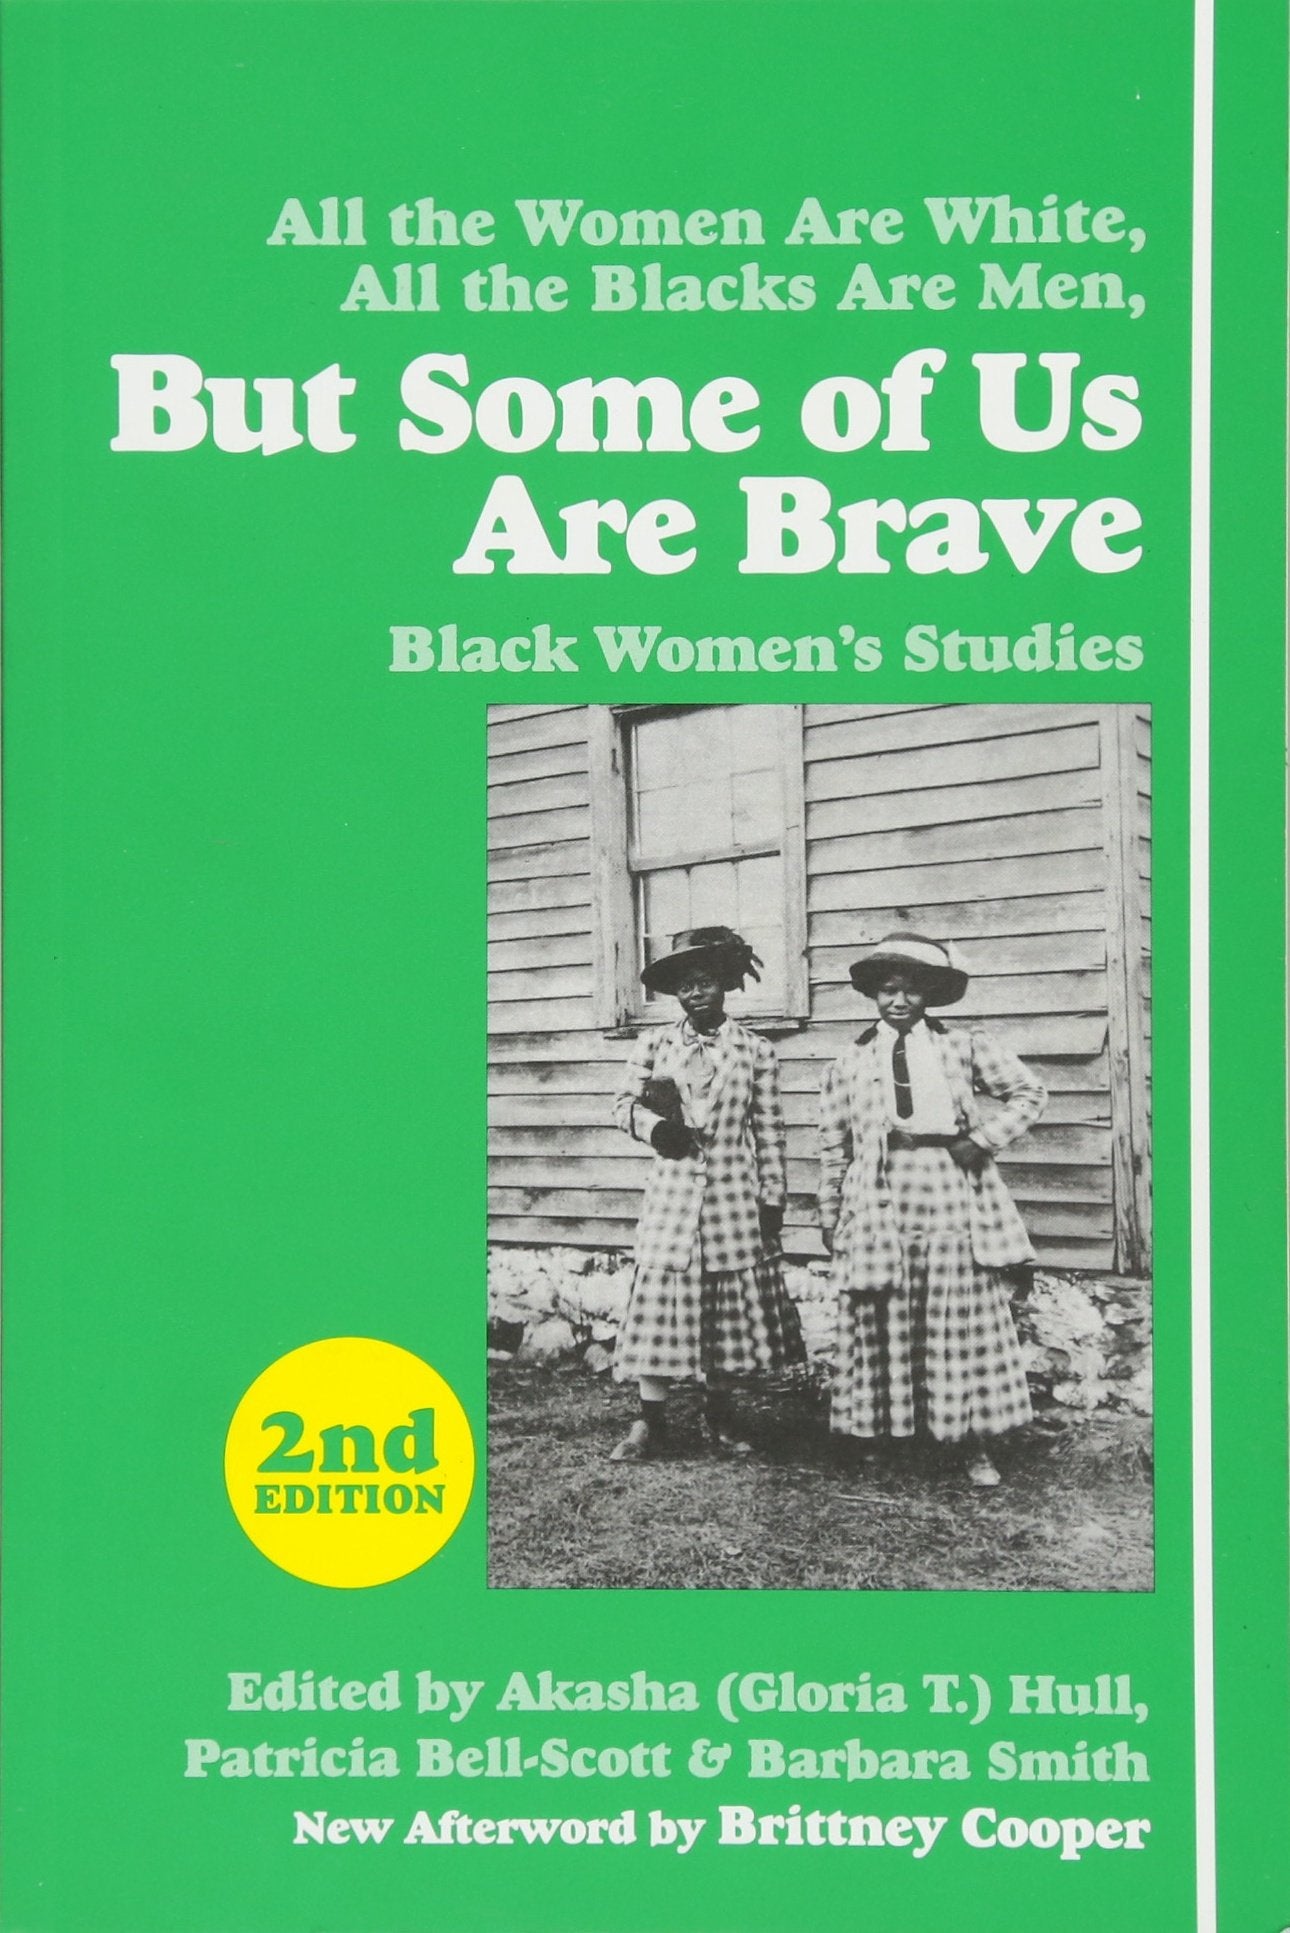 But Some of Us Are Brave // Black Women's Studies